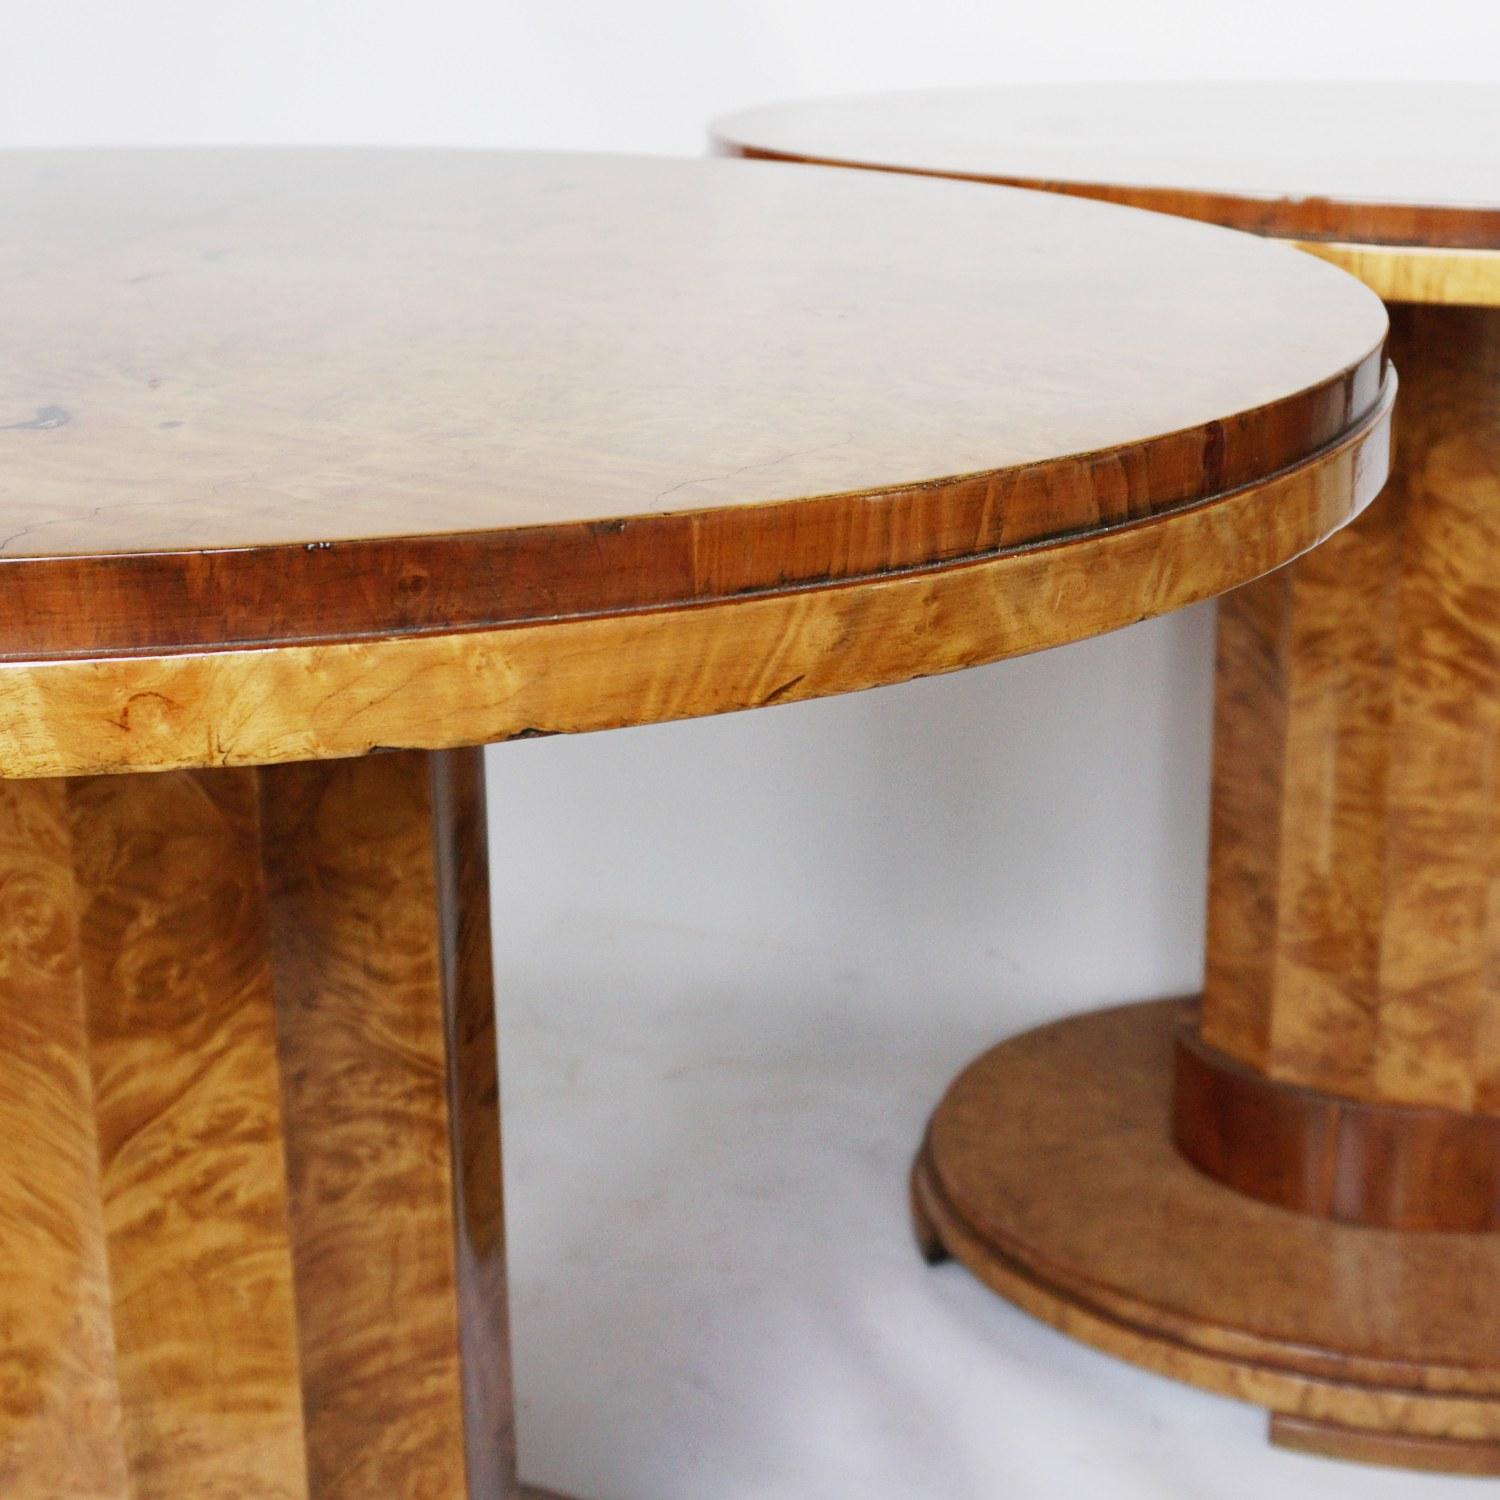 A pair of Art Deco centre tables by Harry & Lou Epstein. Veneered walnut oval tables with fluted central columns and oval, stepped bases. Elm banding to bottom of stem.

Dimensions: H 75cm, W 91cm, D 73cm

Origin: English

Date: circa